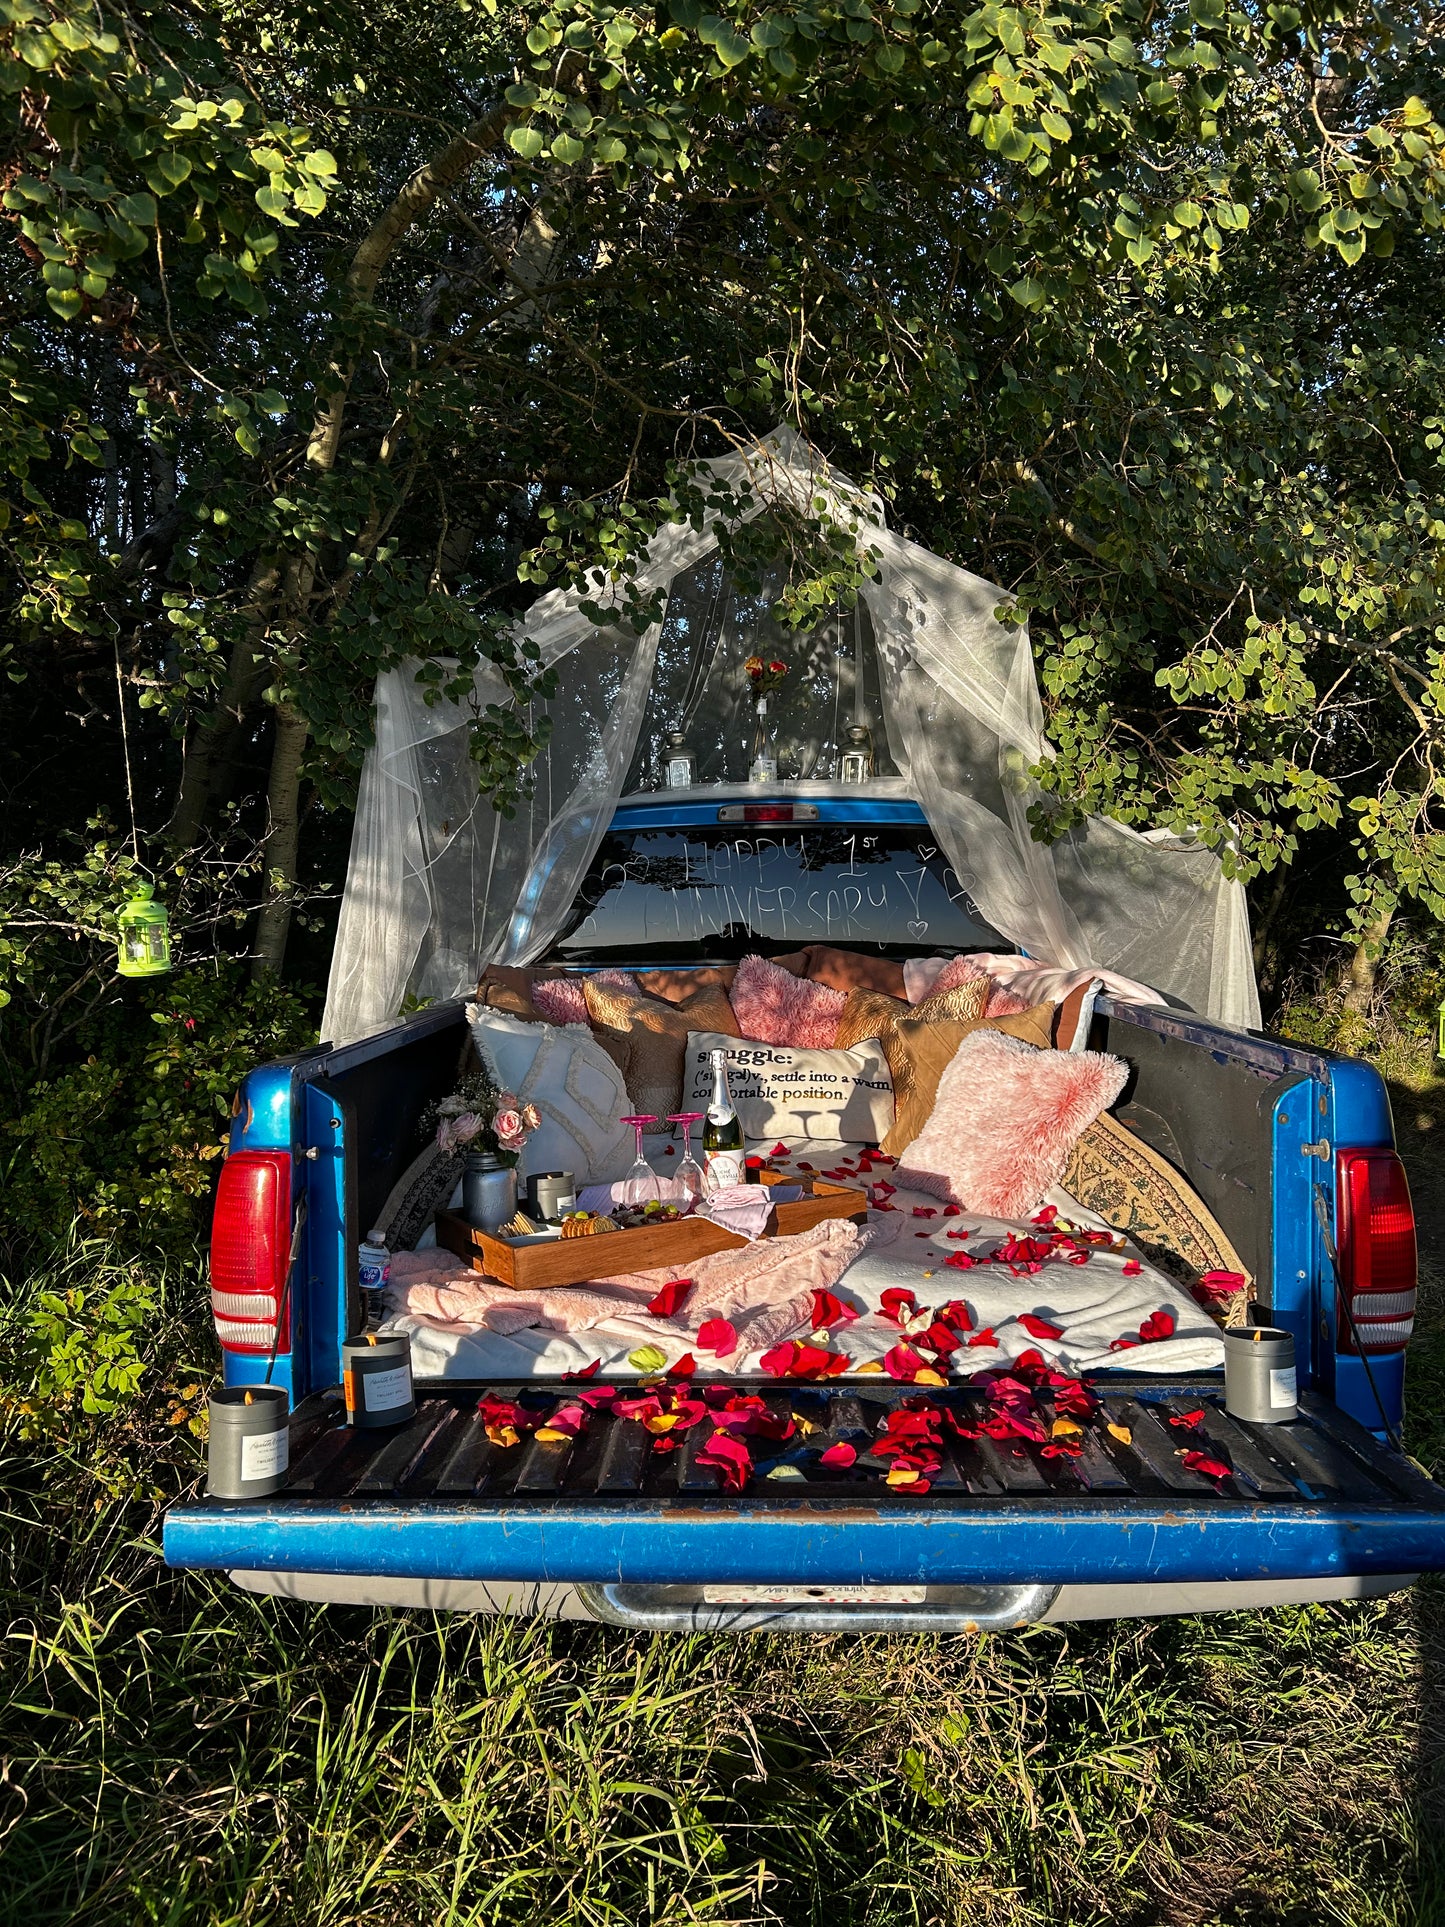 Romantic Truck Date for 2